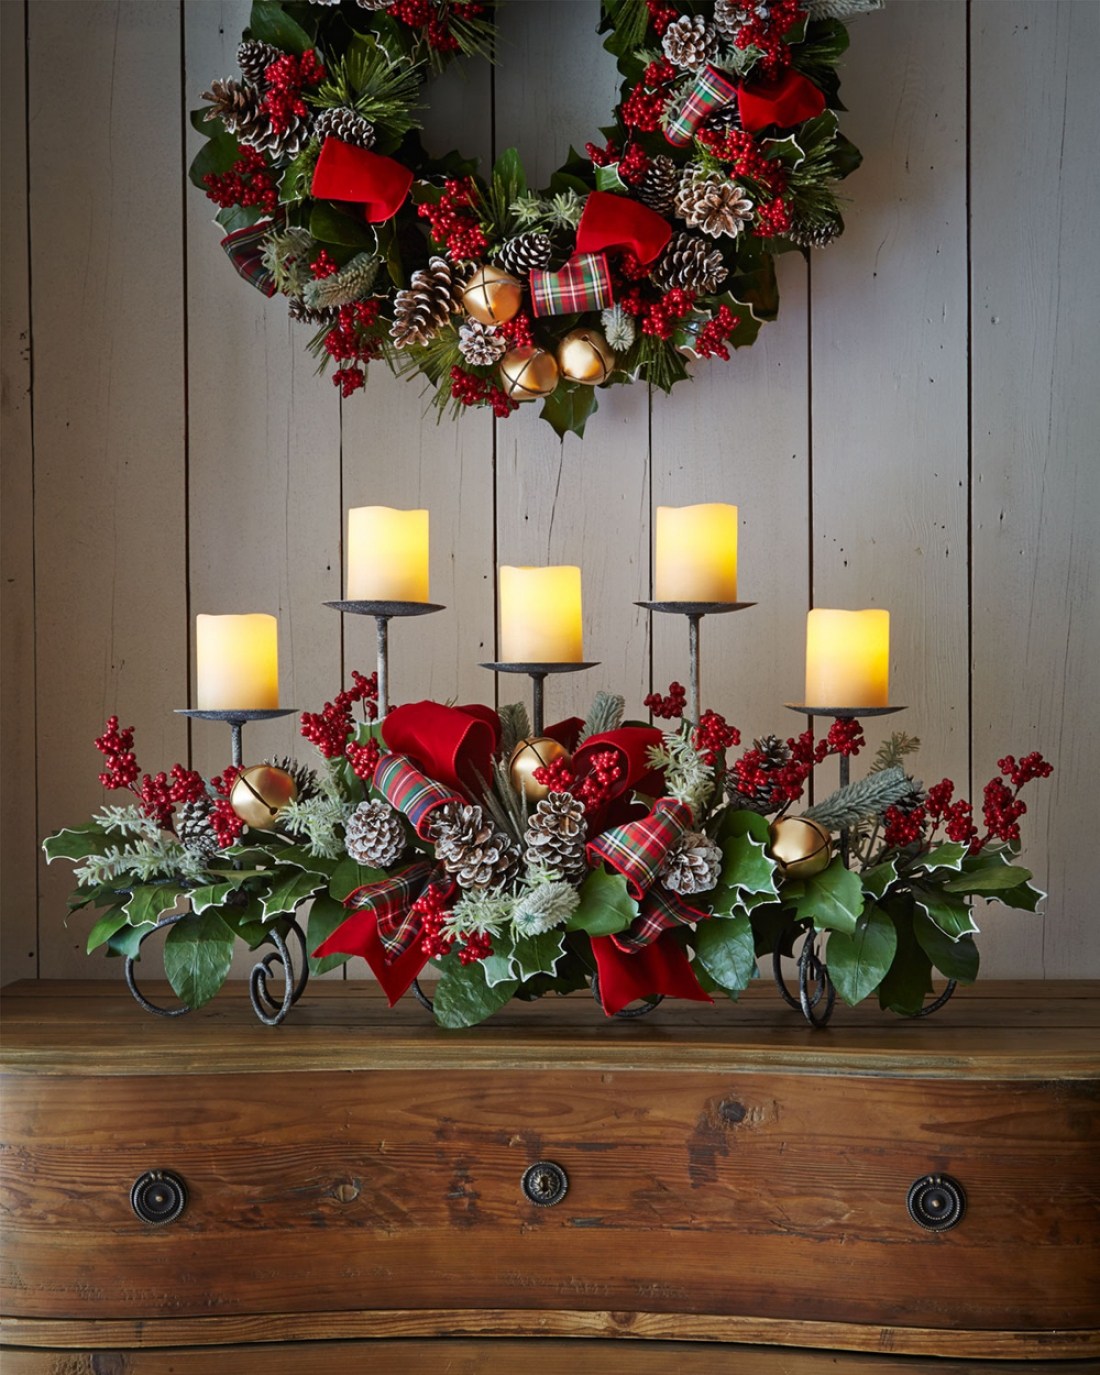 Dining Room Set Examples With Christmas Centerpieces For Your inside Christmas Floral Table Decorations